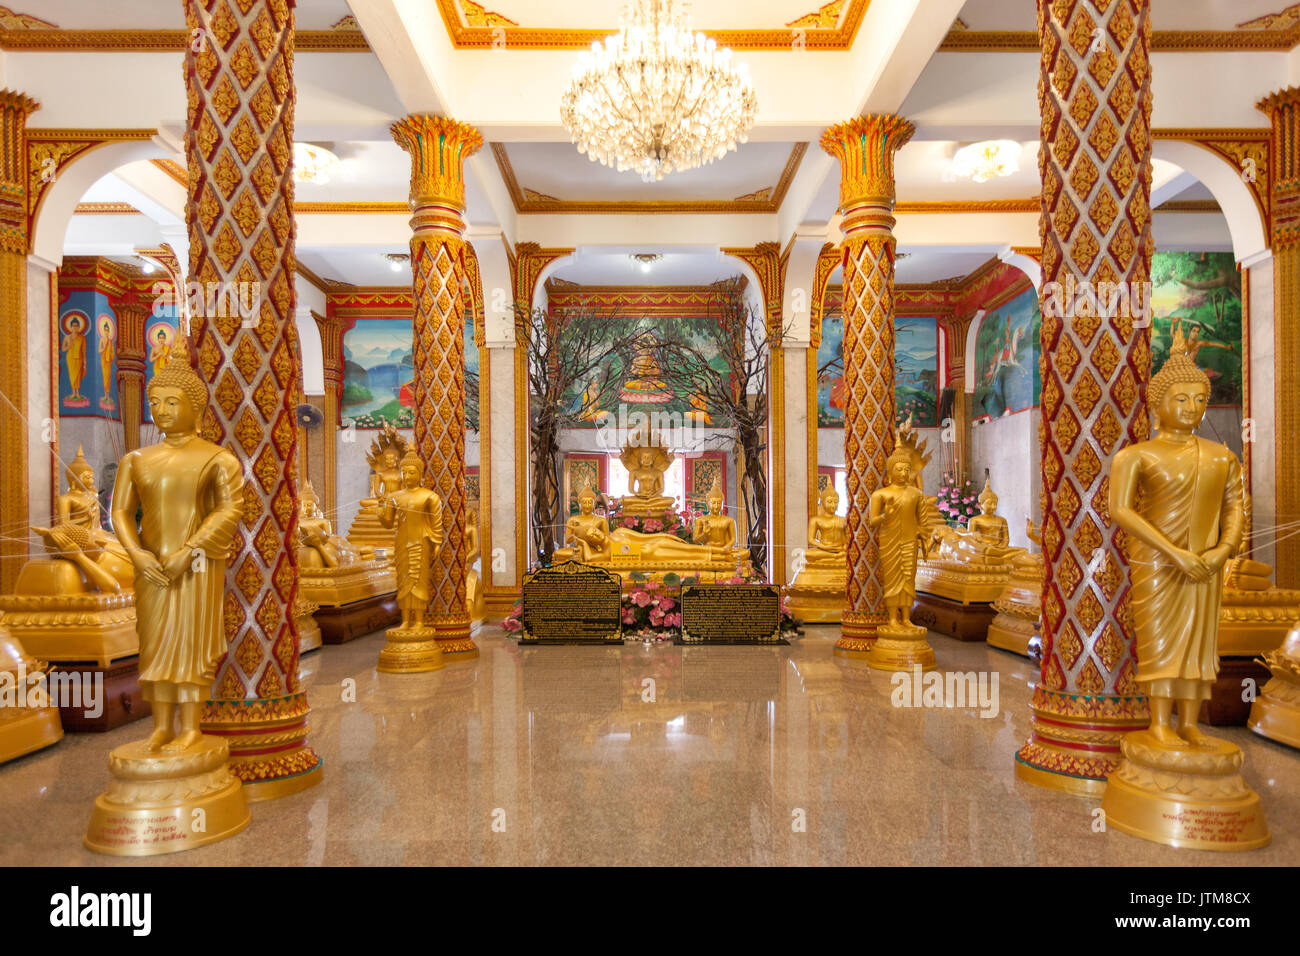 Gilded standing, seated and reclining Buddha statues inside the Viharn hall at Wat Chalong Temple in Phuket, Thailand Stock Photo